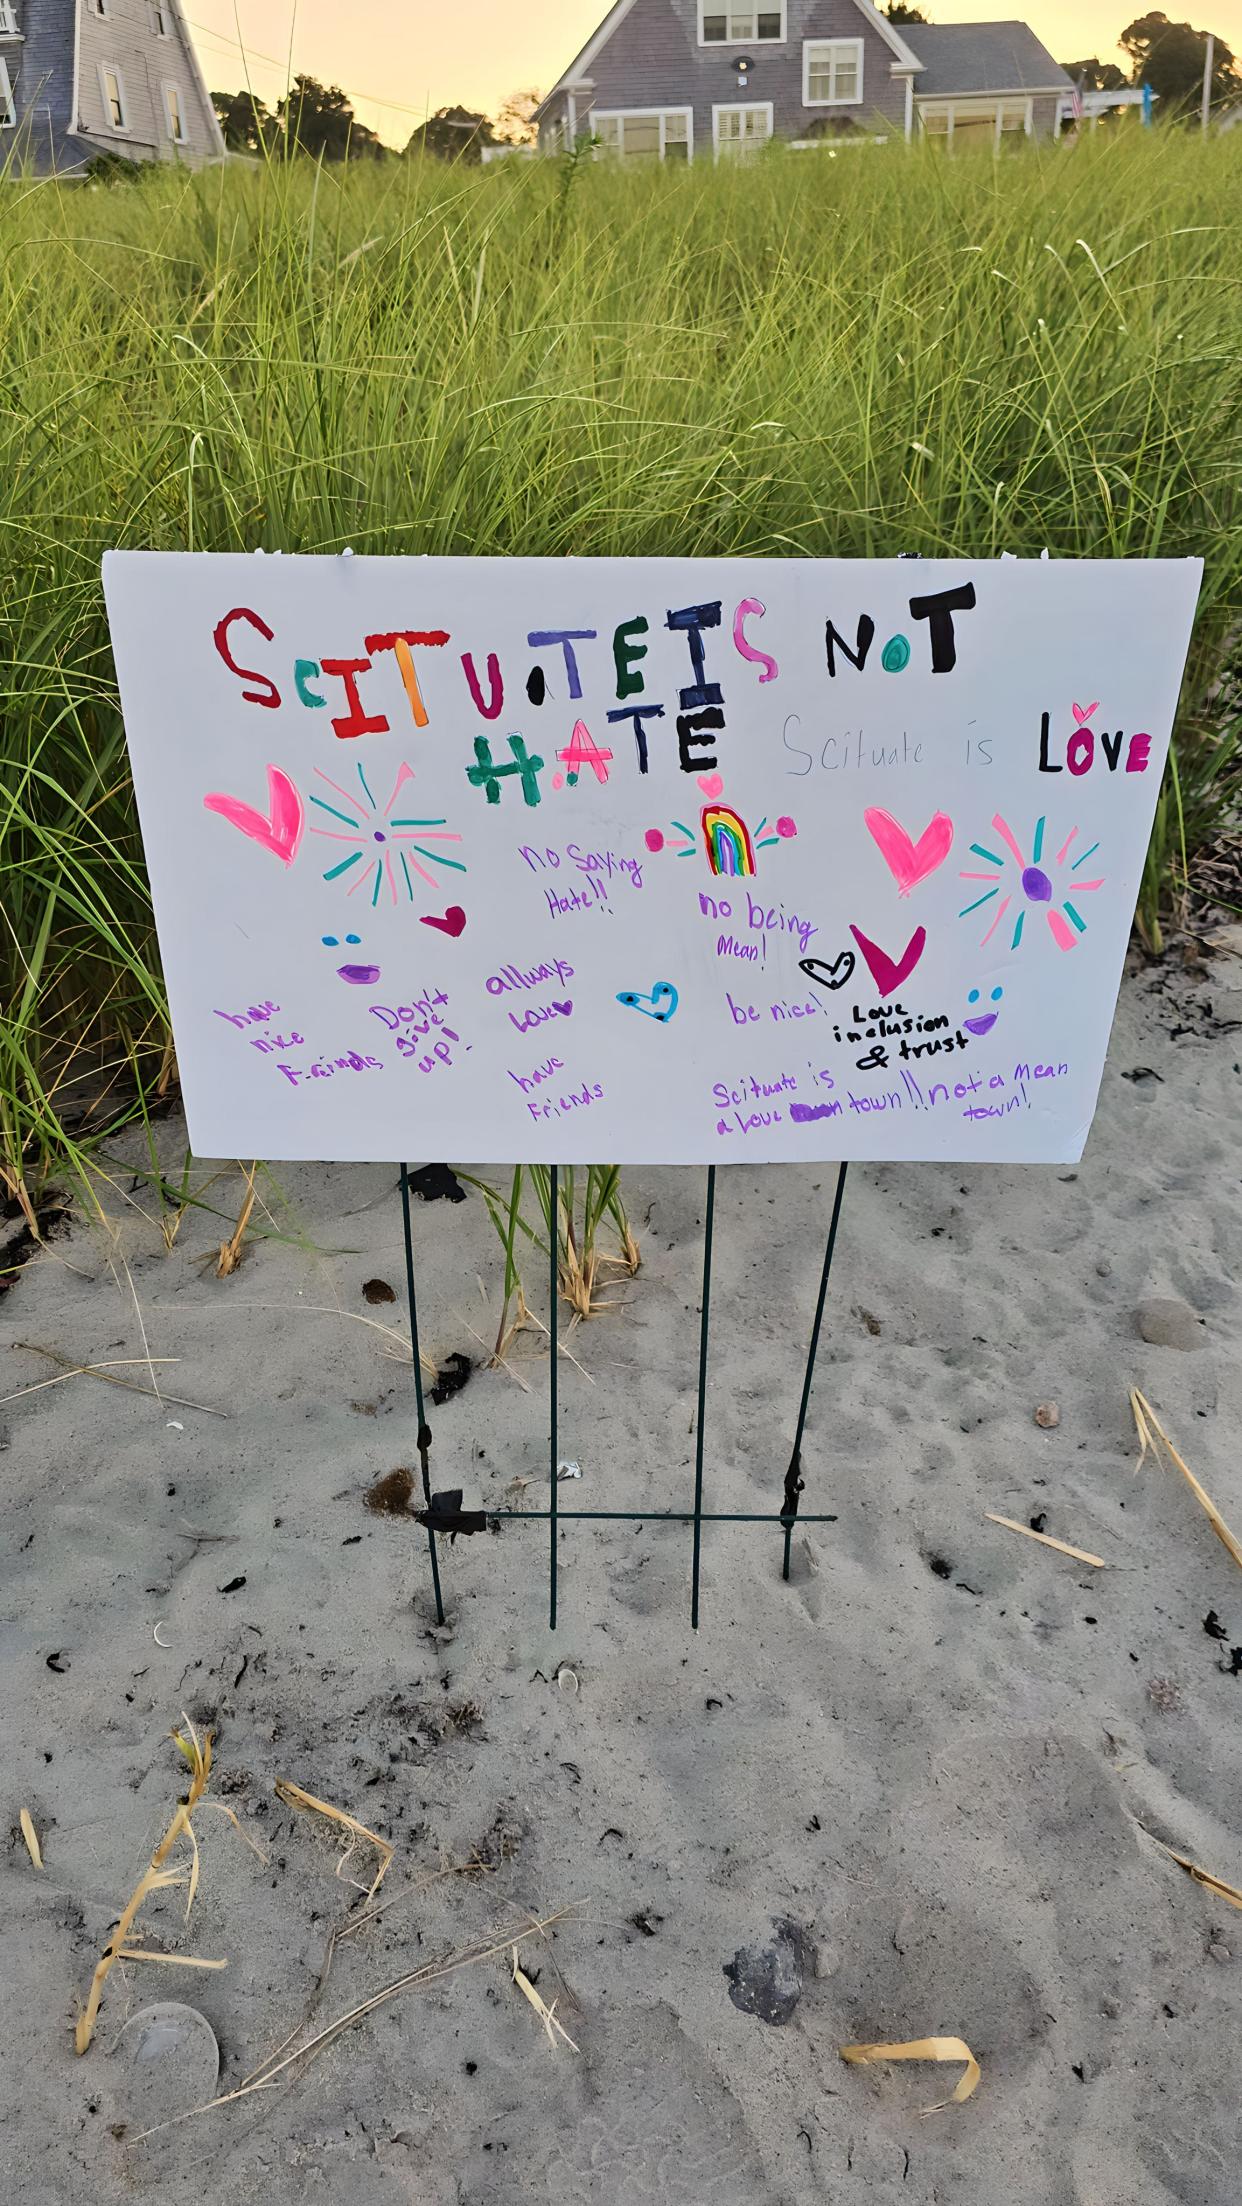 Scituate residents placed illuminated lanterns along the seashore in support of Scituate Public Schools Diversity, Equity and Inclusion Director jamele adams, who was the target of a hateful message in July.